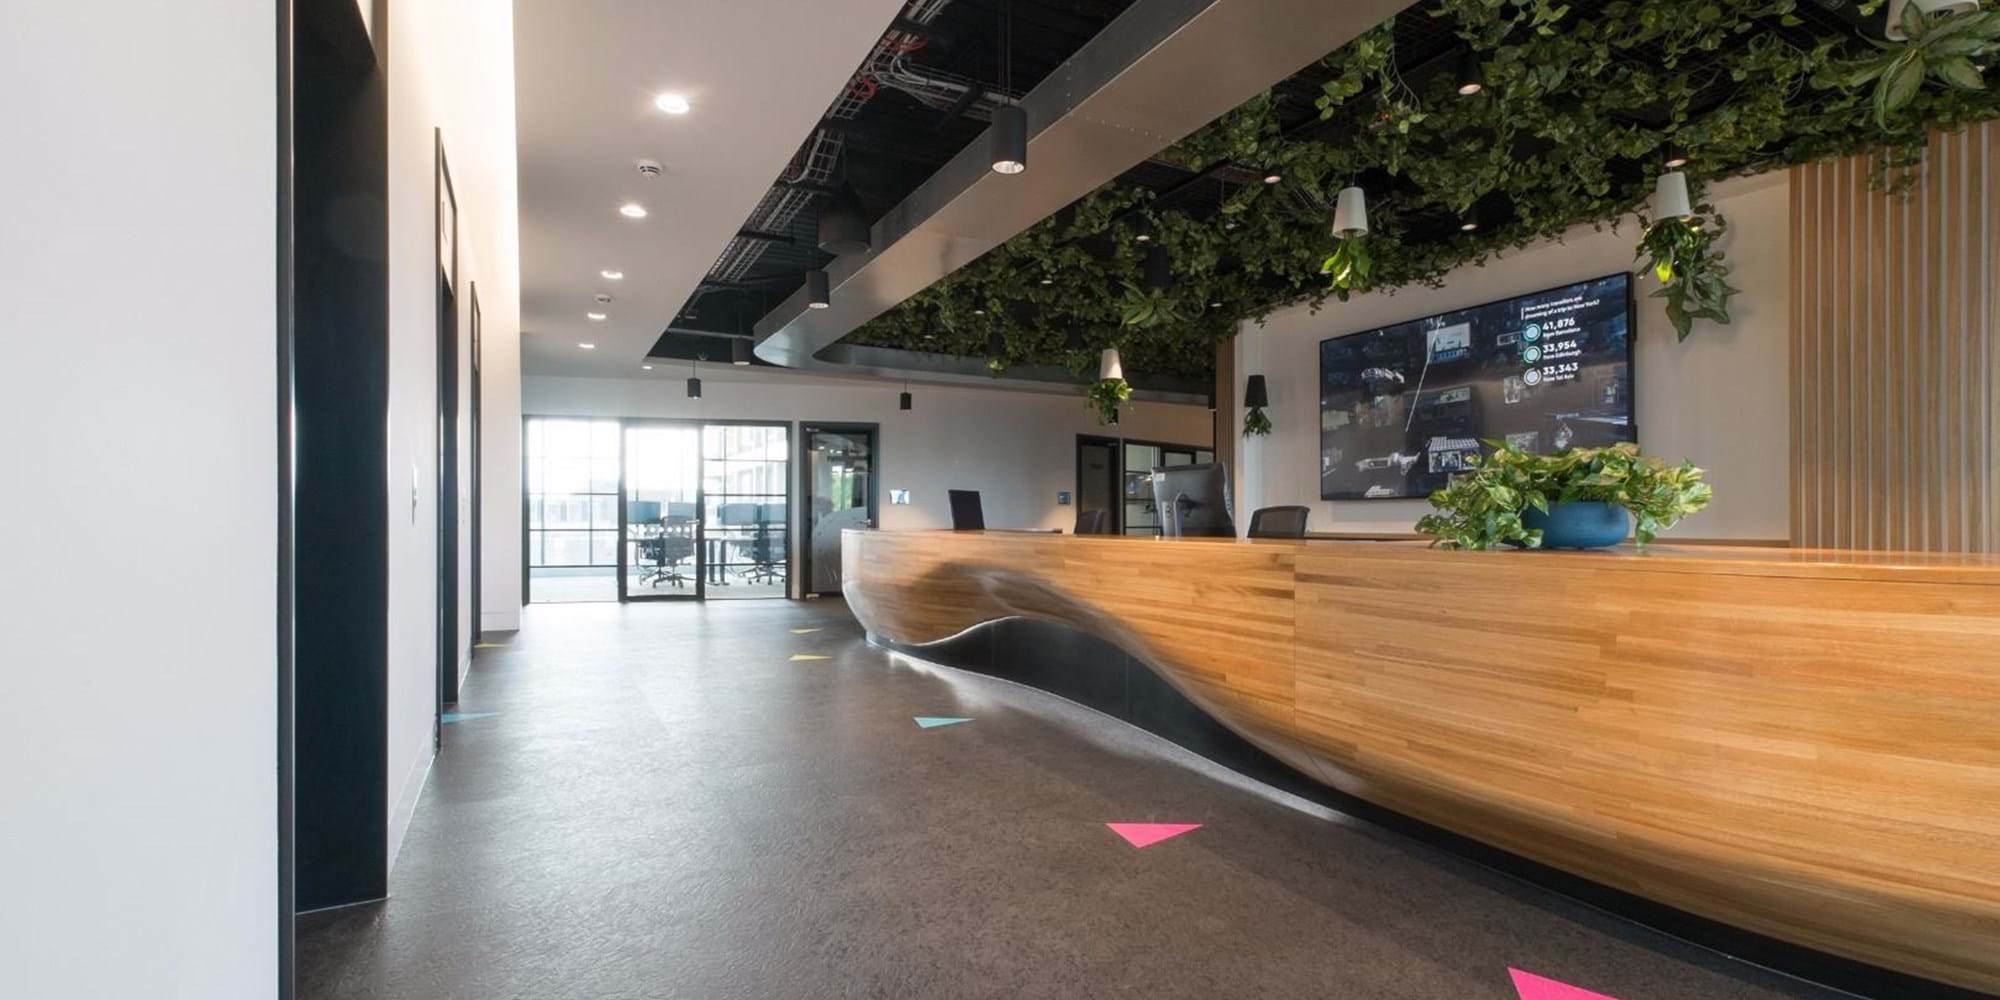 Modus Workspace office design, fit out and refurbishment - Skyscanner - Skyscanner-7.jpg